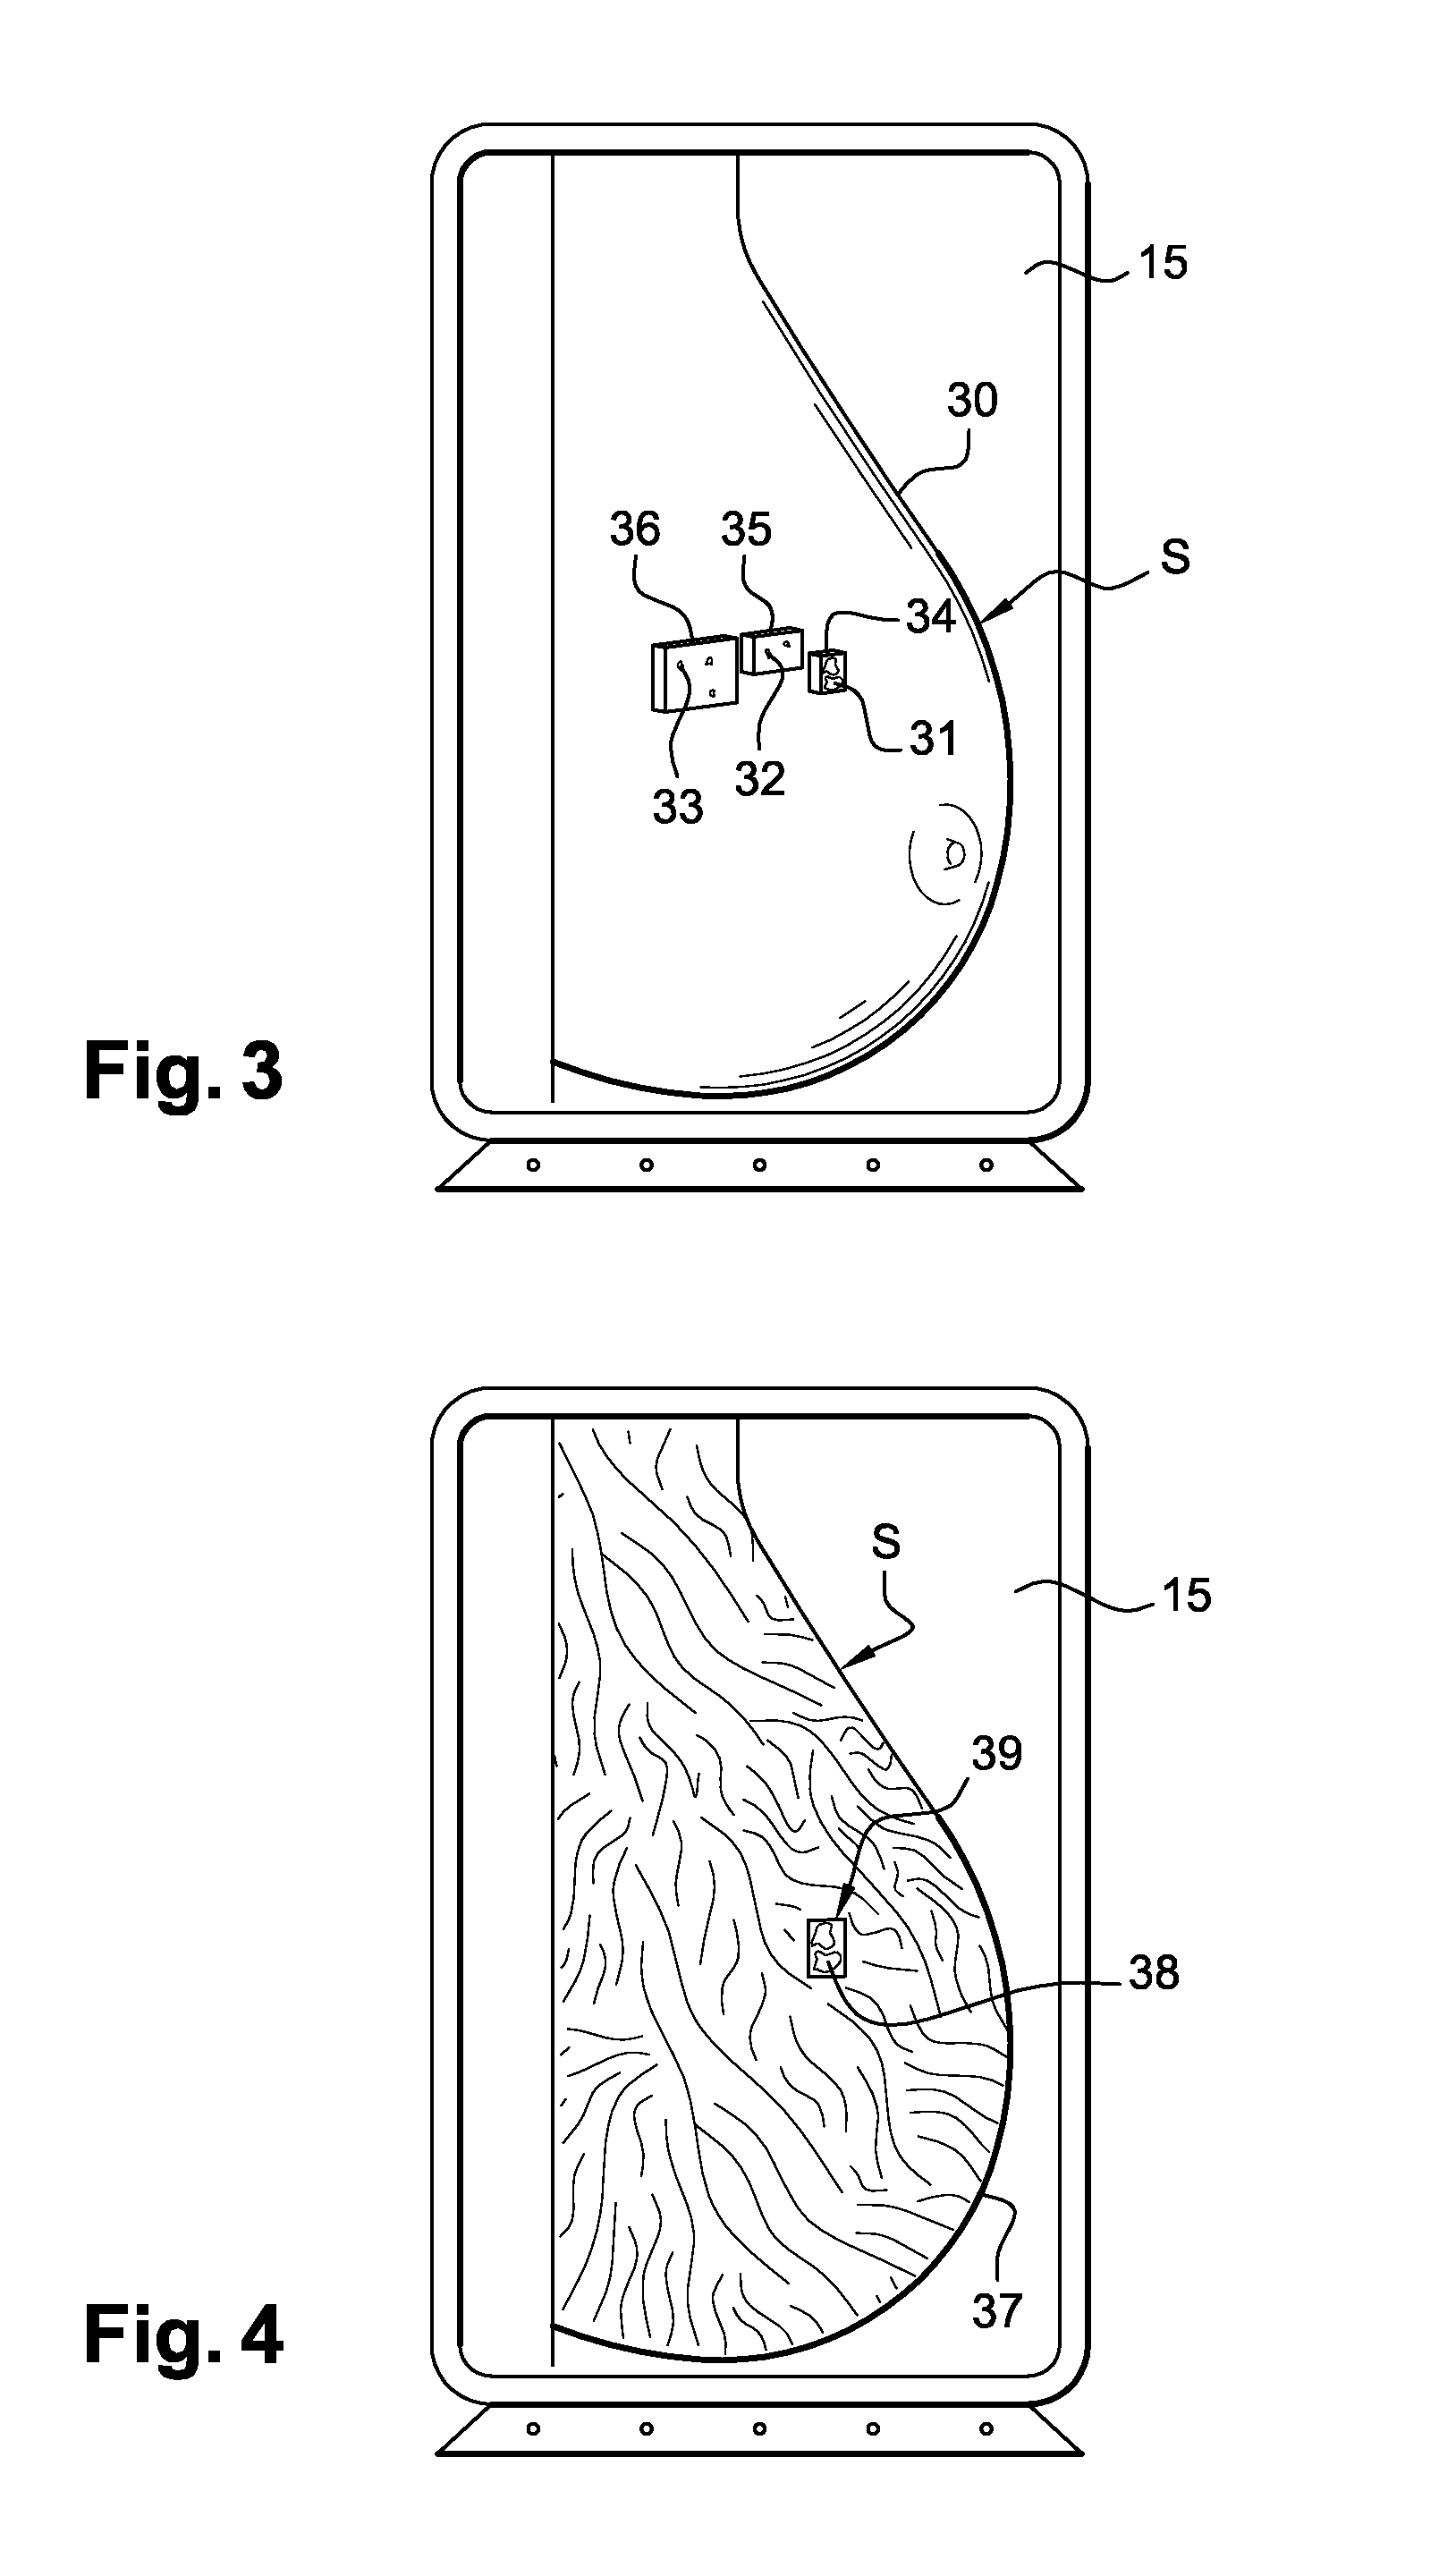 Method for the three-dimensional viewing of tomosynthesis images in mammography